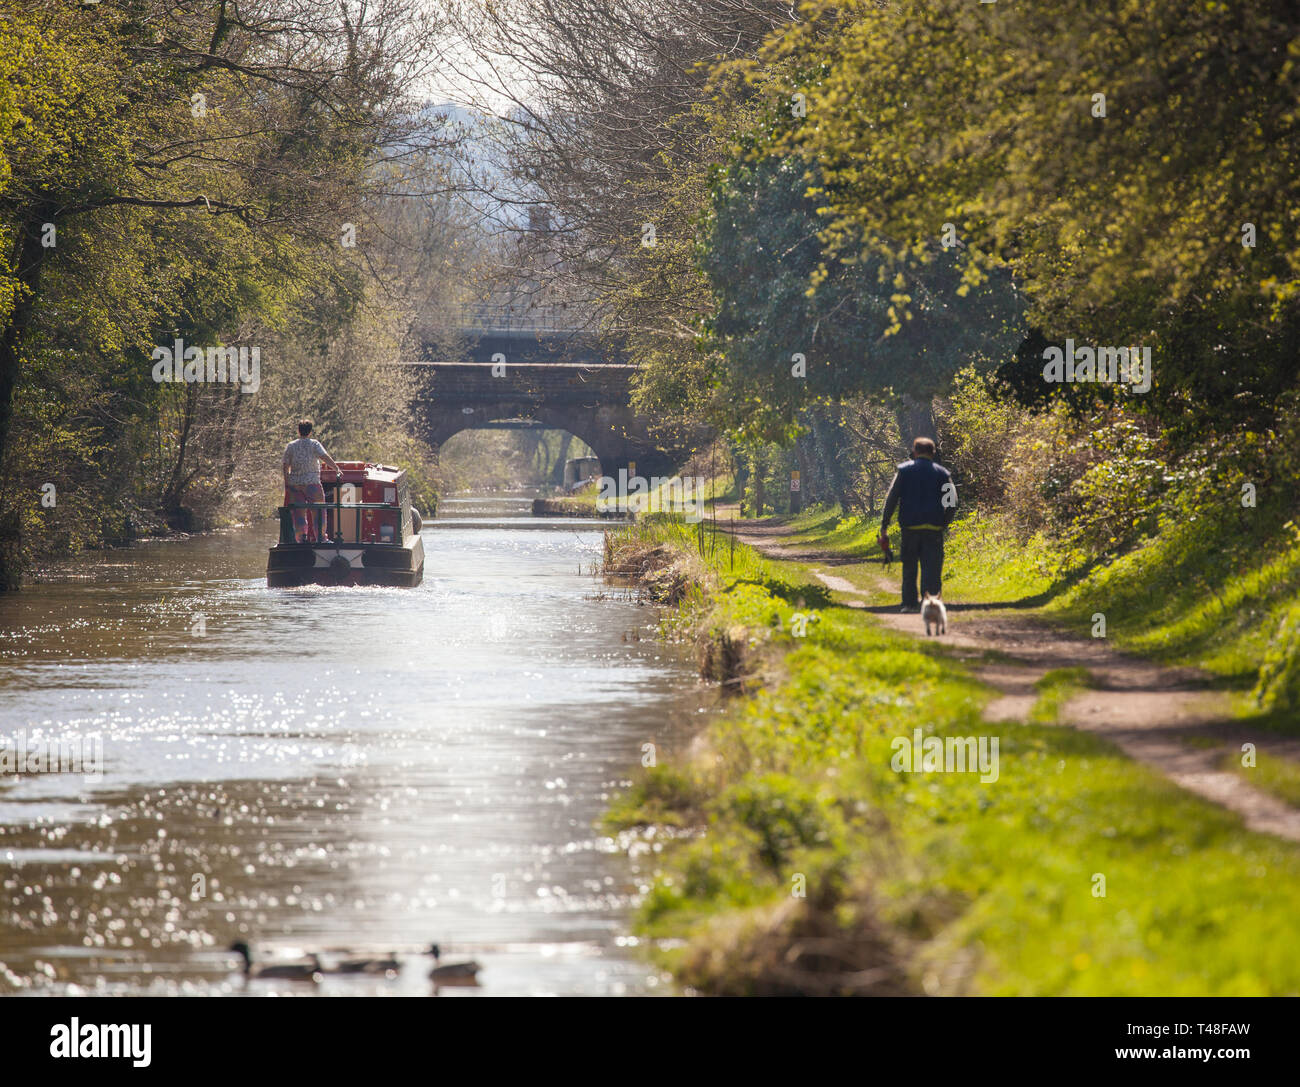 Narrow boat on the Macclesfield canal waterway at Buglawton congleton Cheshire England UK with man walking dog along the towpath Stock Photo